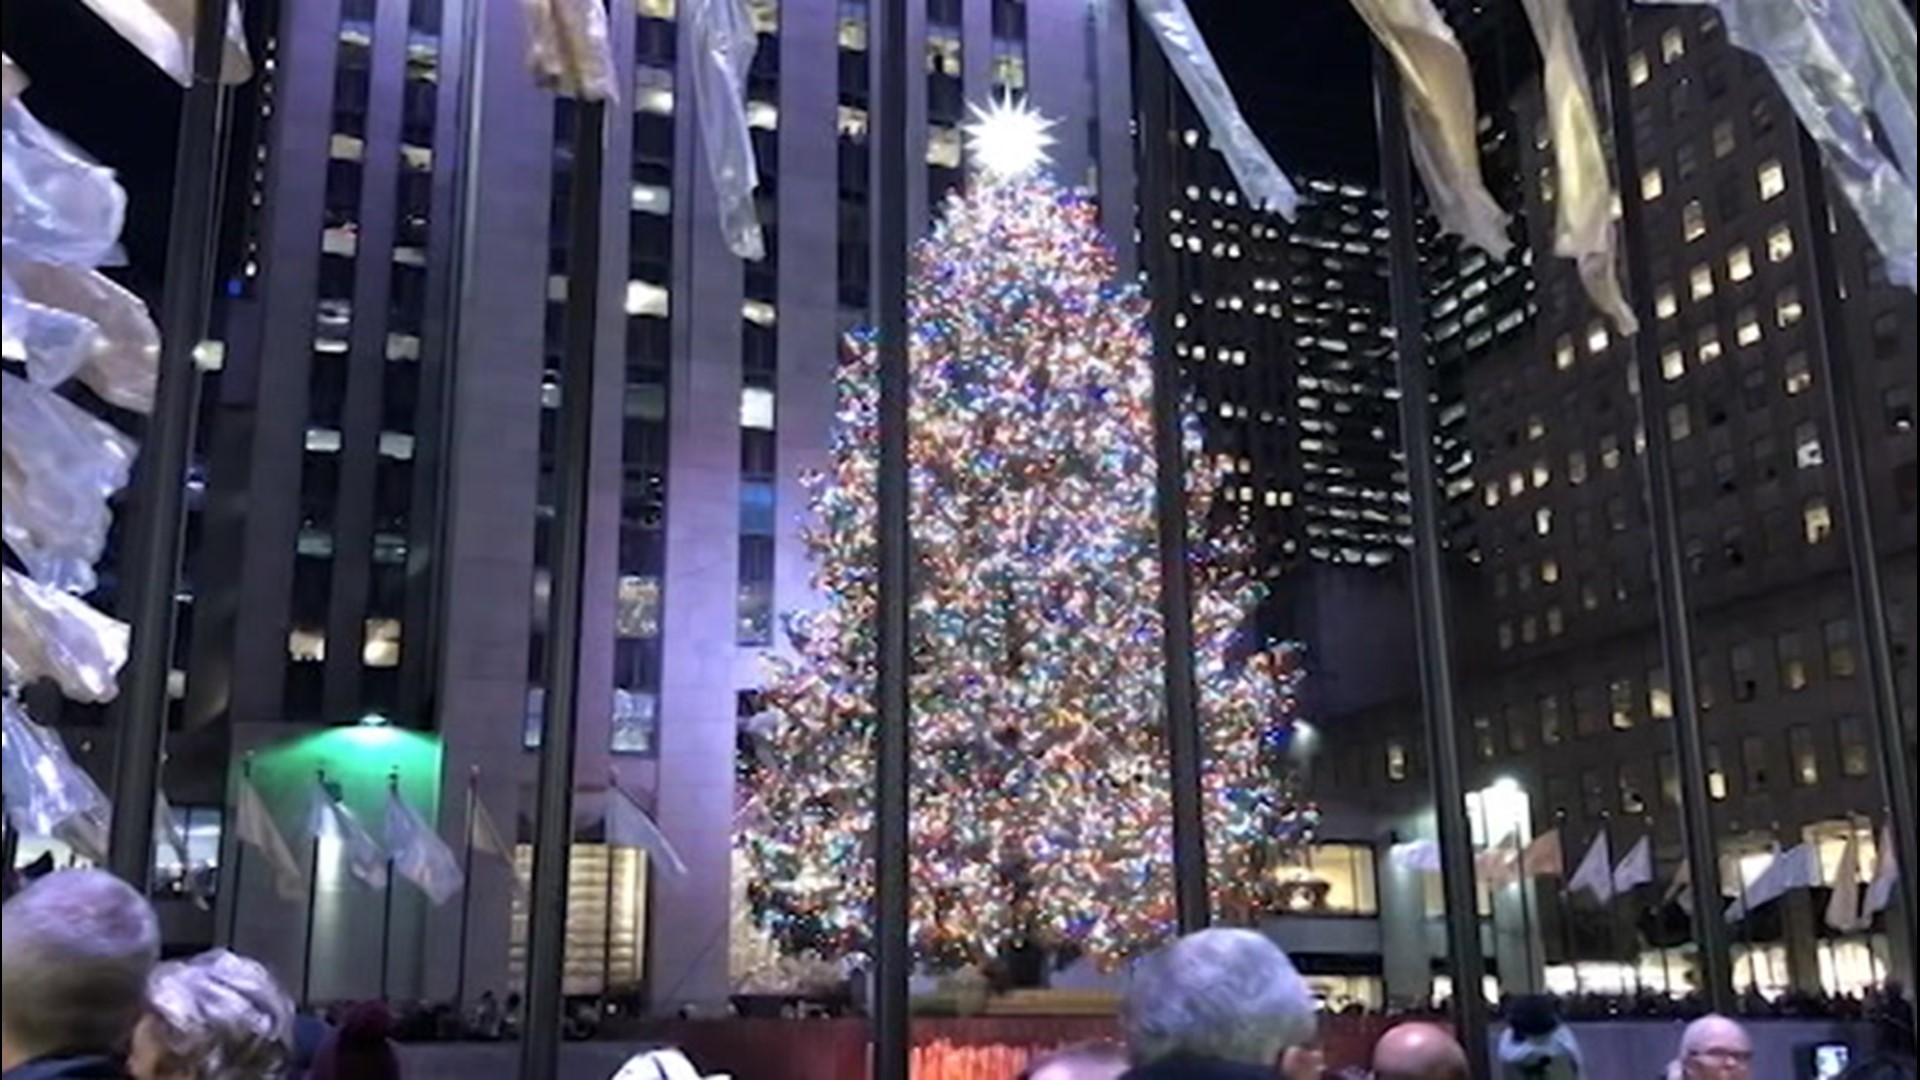 For the 88th year, the Rockefeller Center Tree has returned for the holidays. Normally, the public is able to view the tree being lit for the first time, but that won't be the case this year.